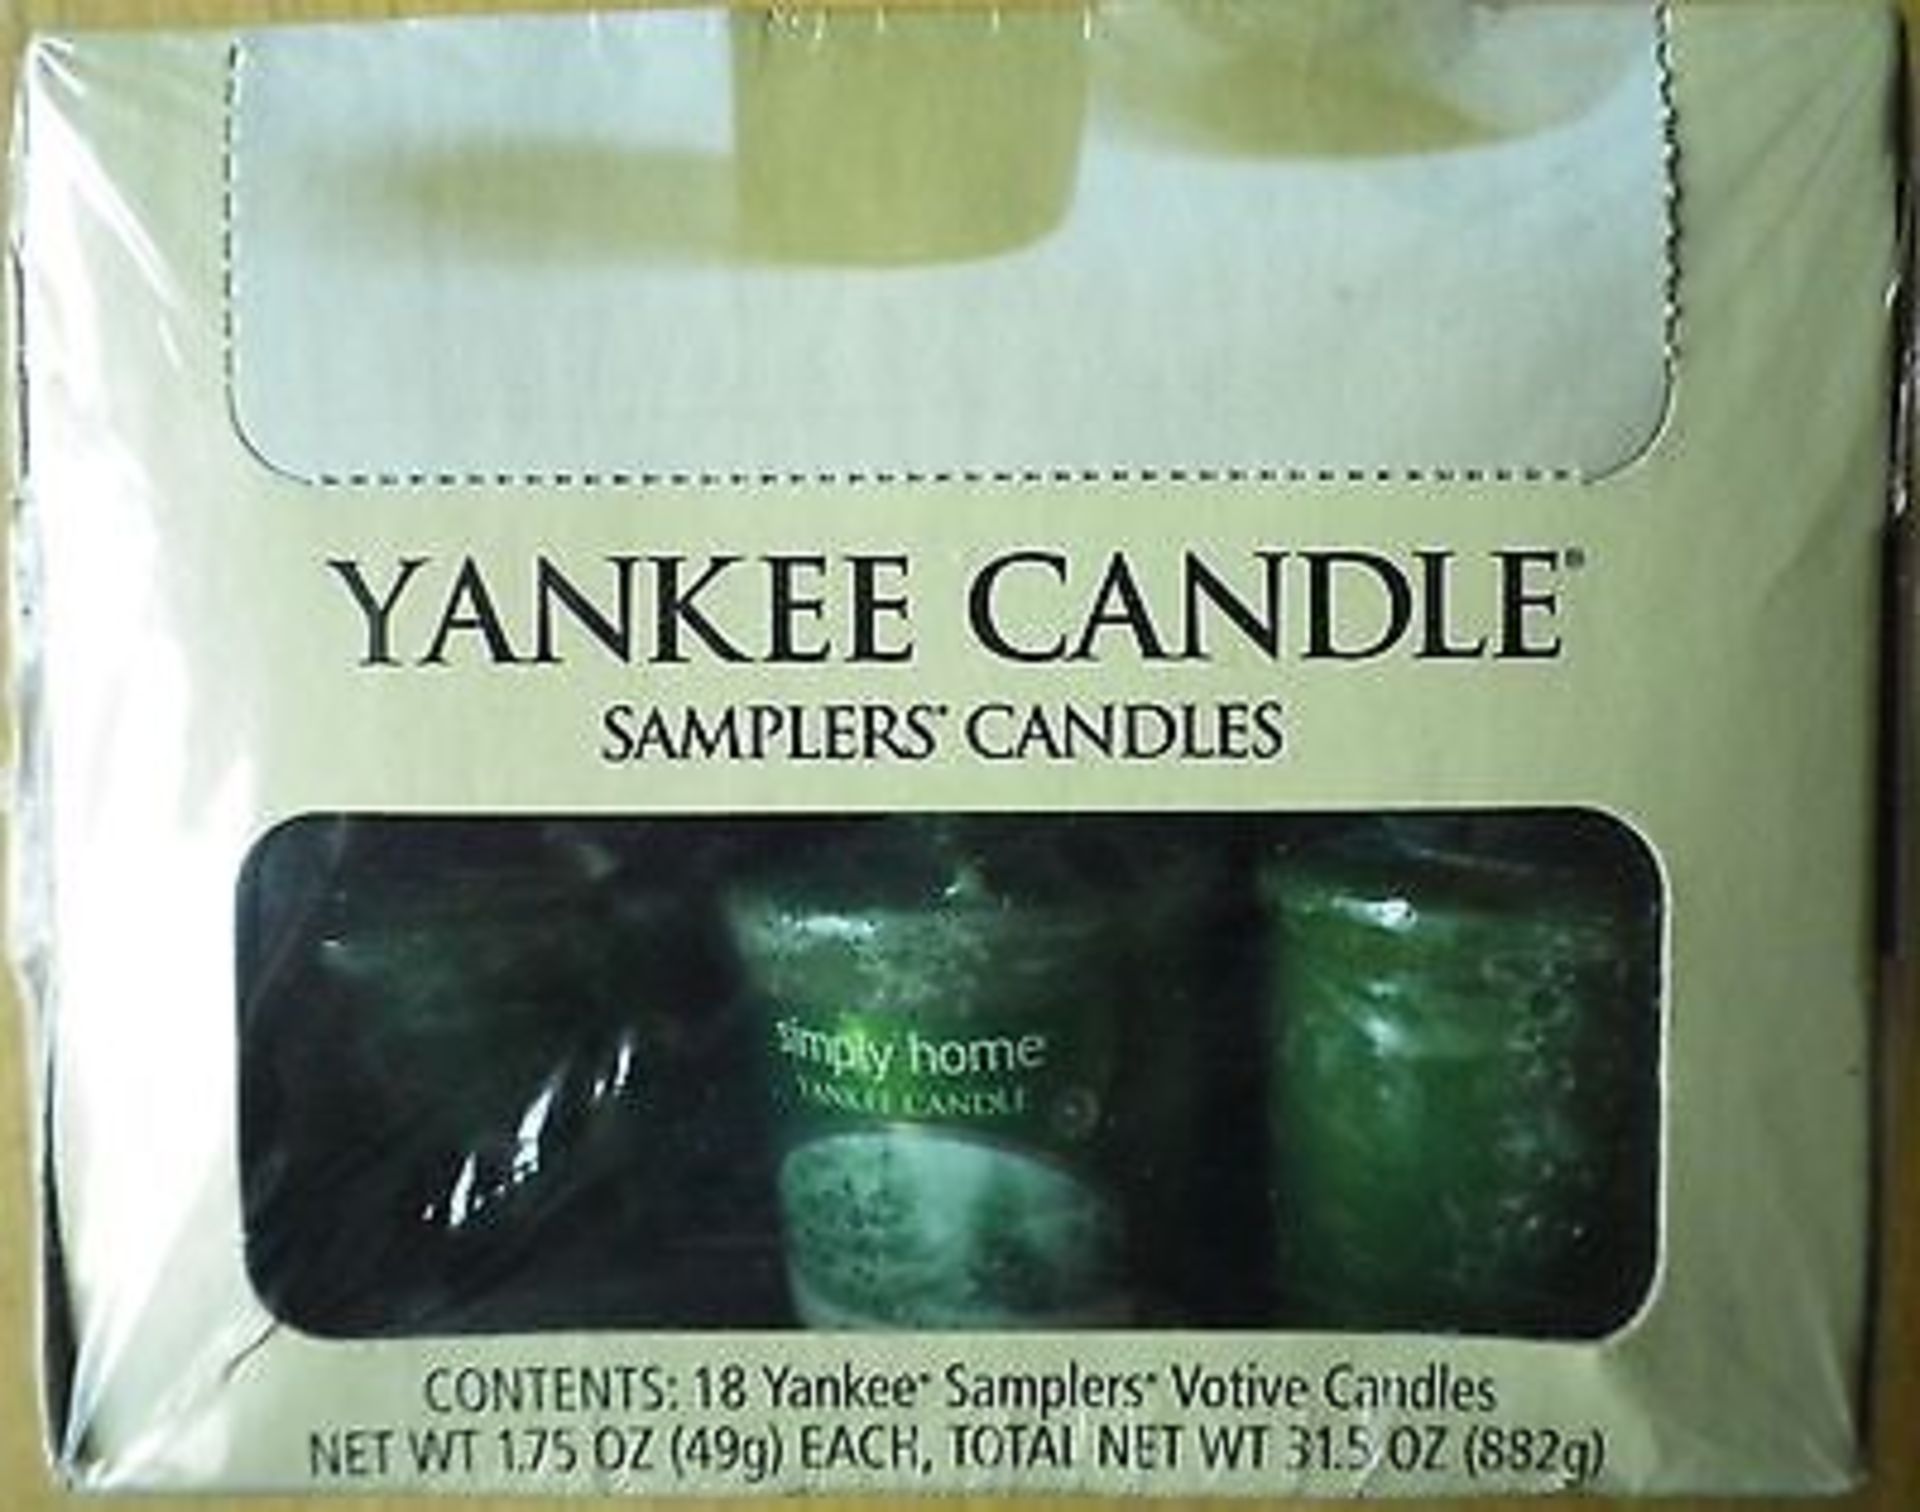 V *TRADE QTY* Brand New 18 x Yankee Candle Votive Frosted Spruce 49g eBay Price £19.99 X 25 YOUR BID - Image 2 of 2